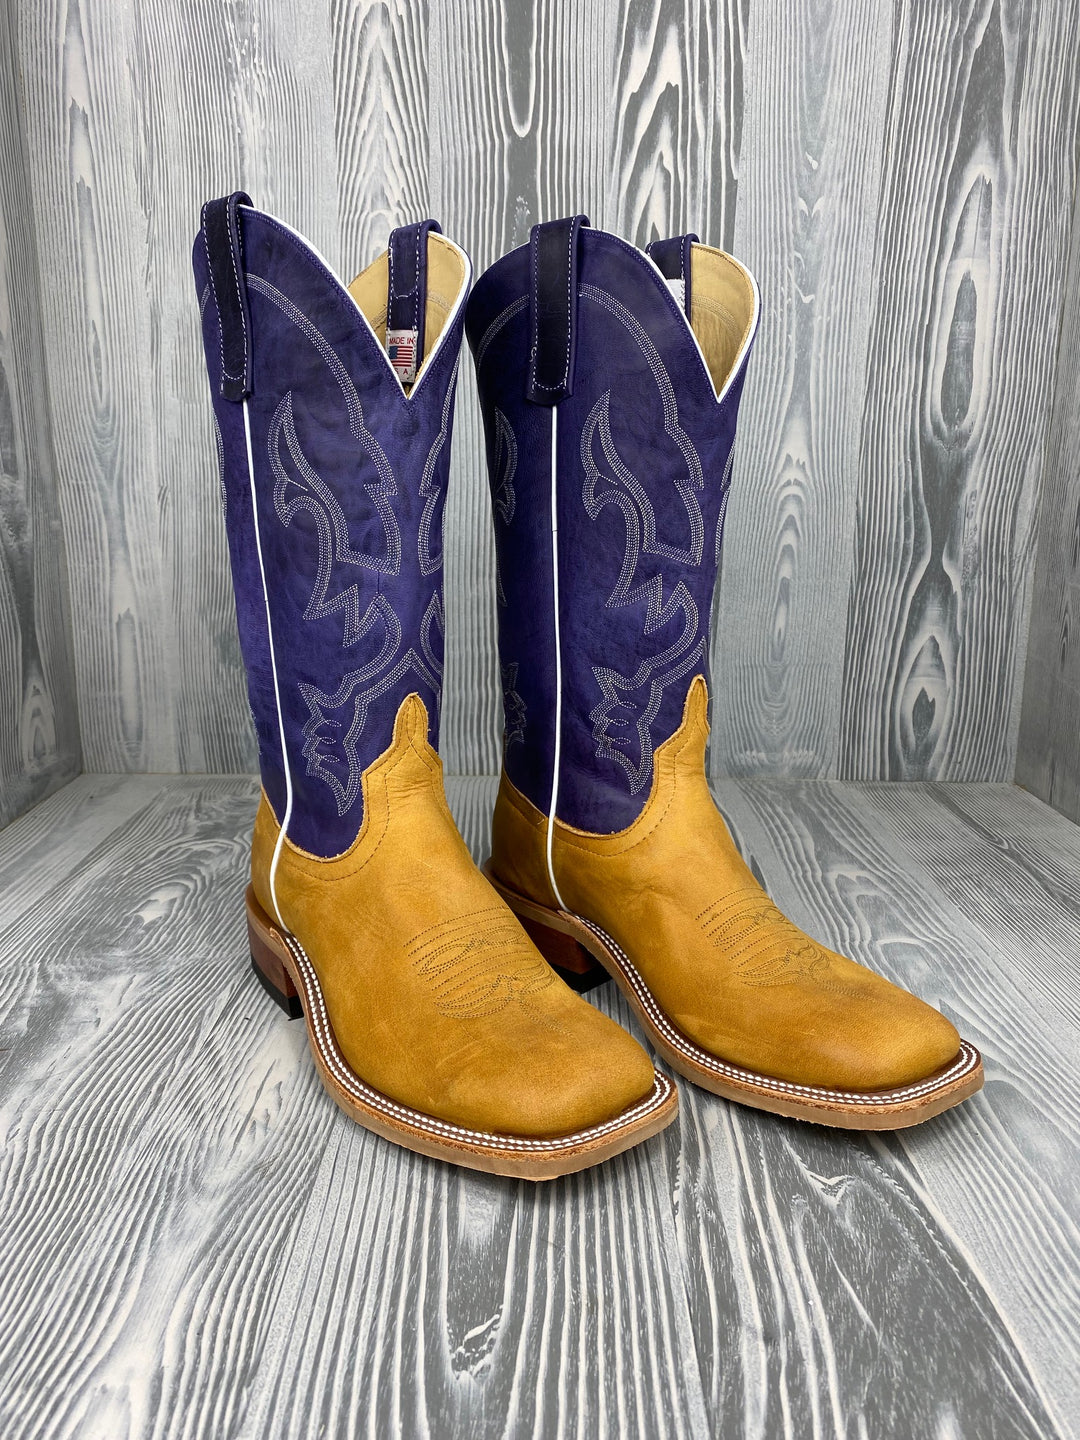 Men's Anderson Bean Rust Crazyhorse with 13" Purple Mad Dog Tops